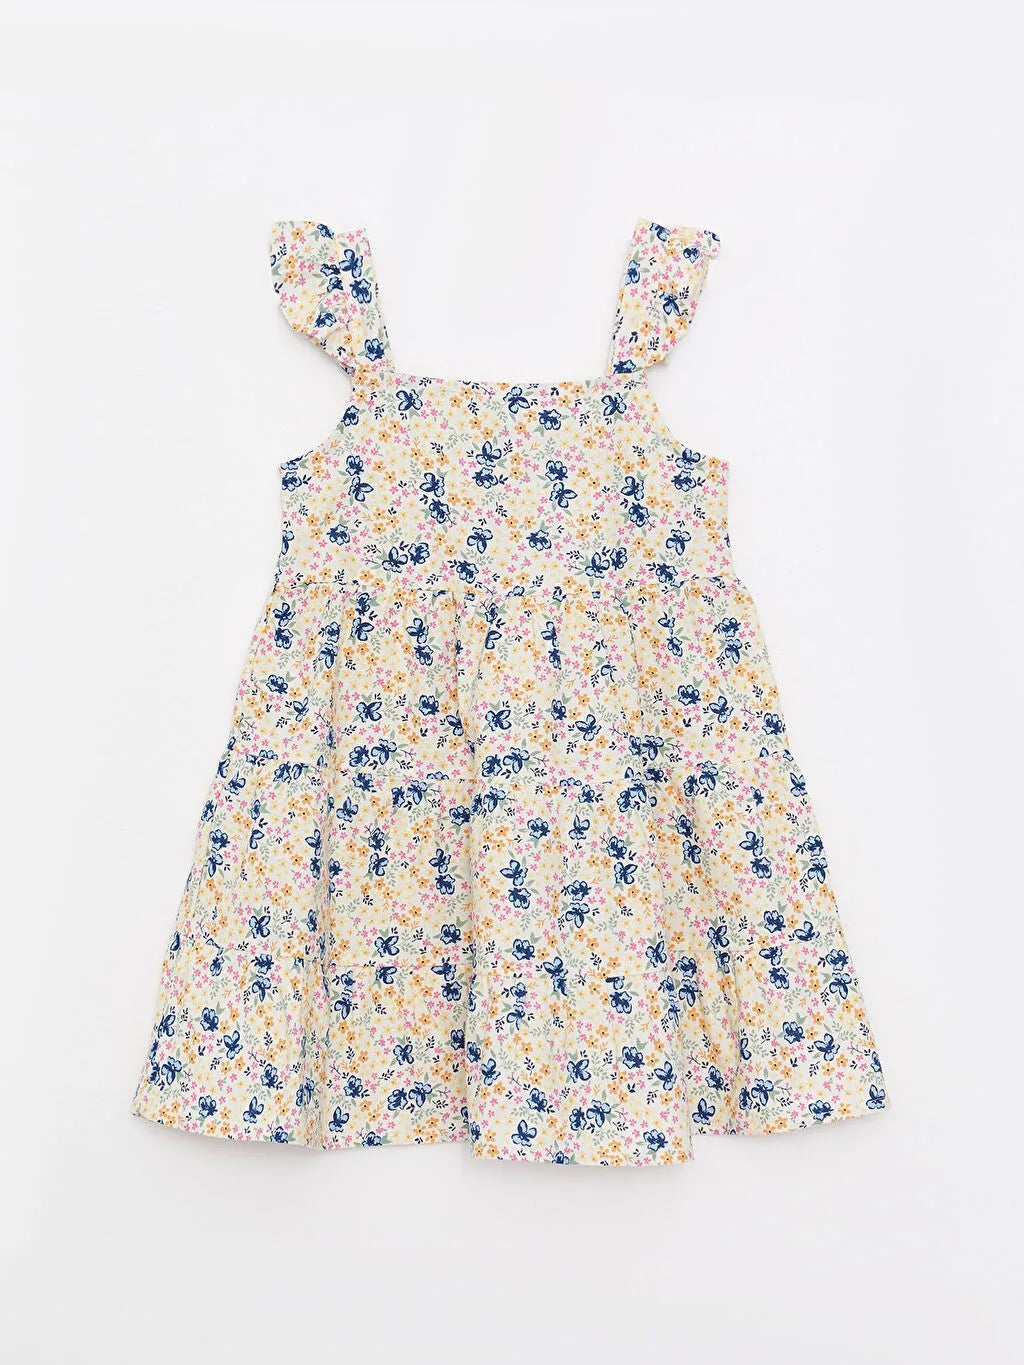 Square Neck Strap Printed Cotton Baby Girl Dress